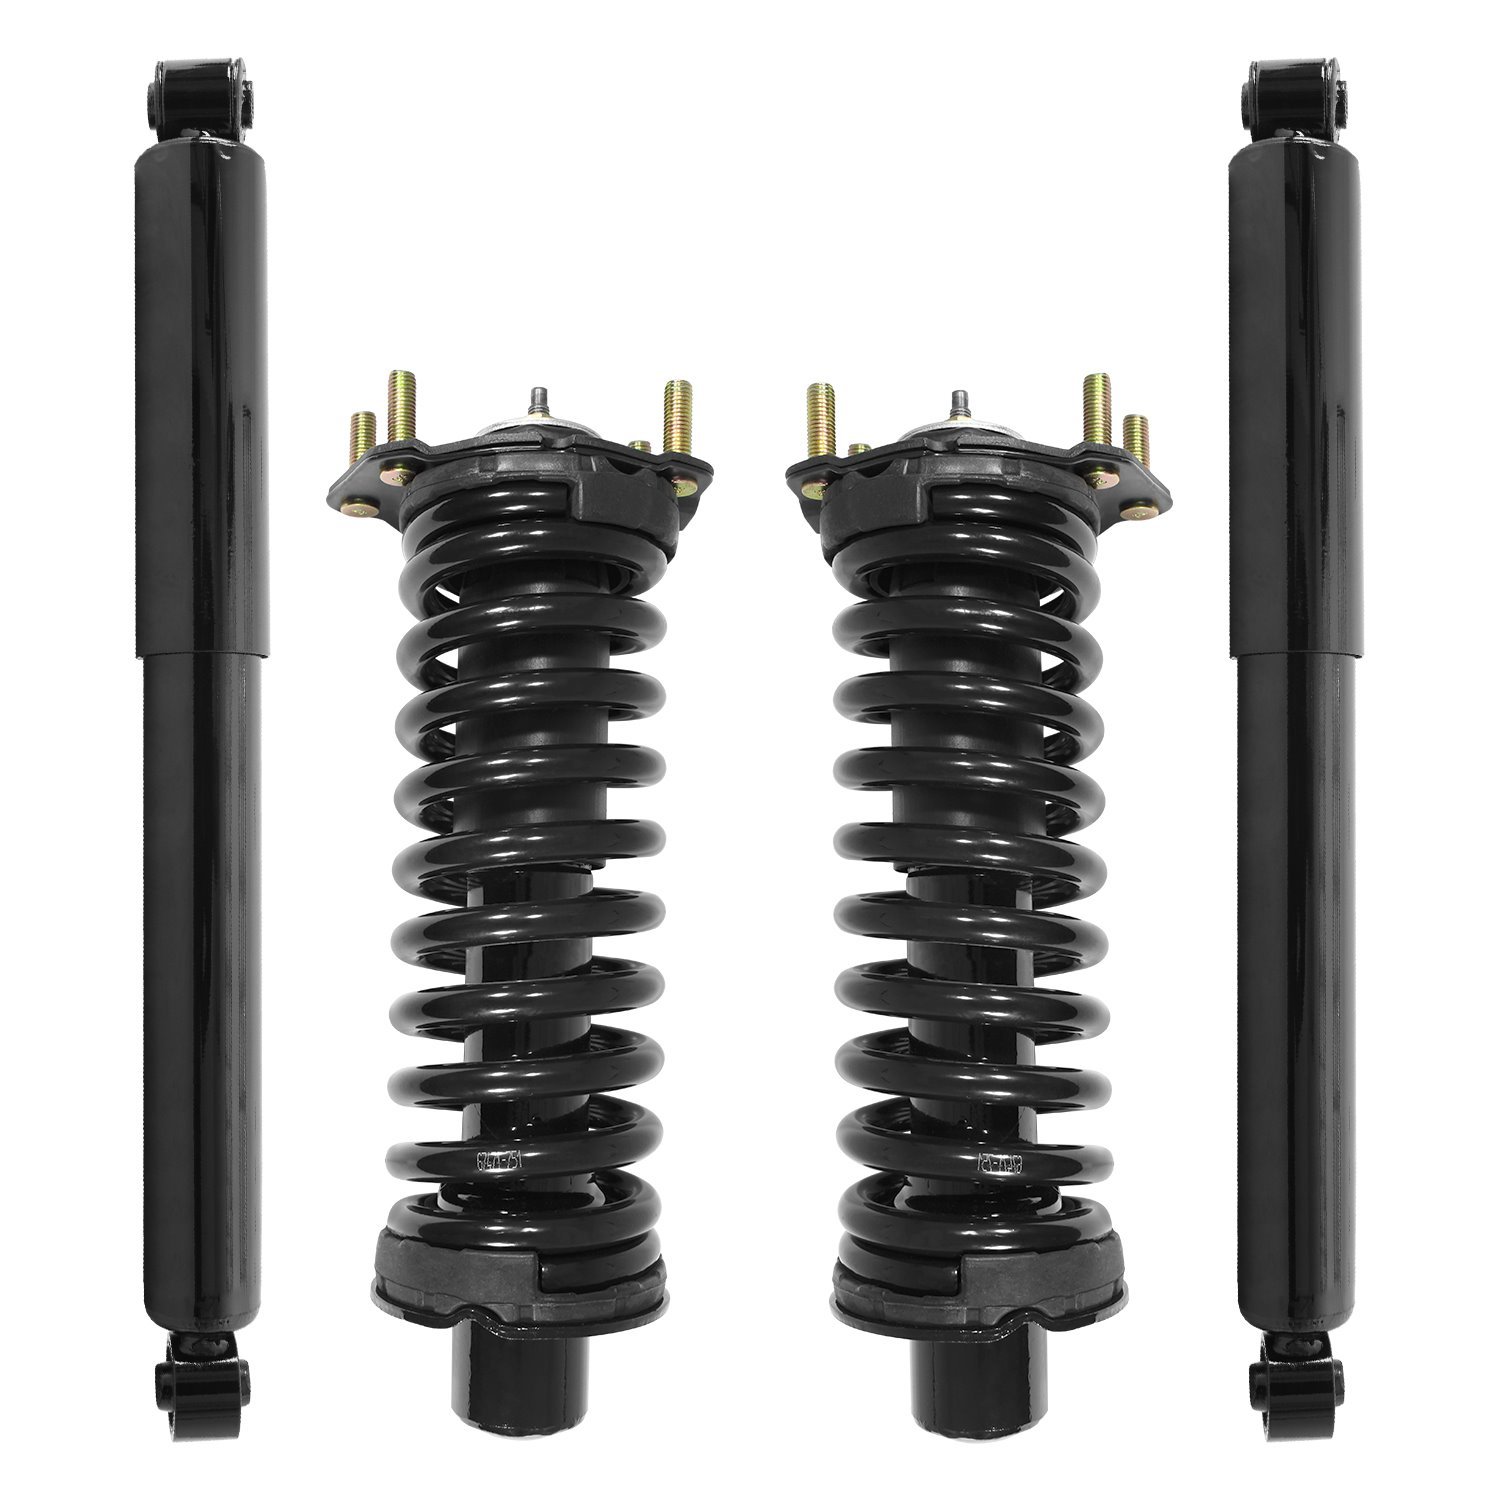 4-11201-253020-001 Front & Rear Suspension Strut & Coil Spring Assembly Fits Select Dodge Nitro, Jeep Liberty